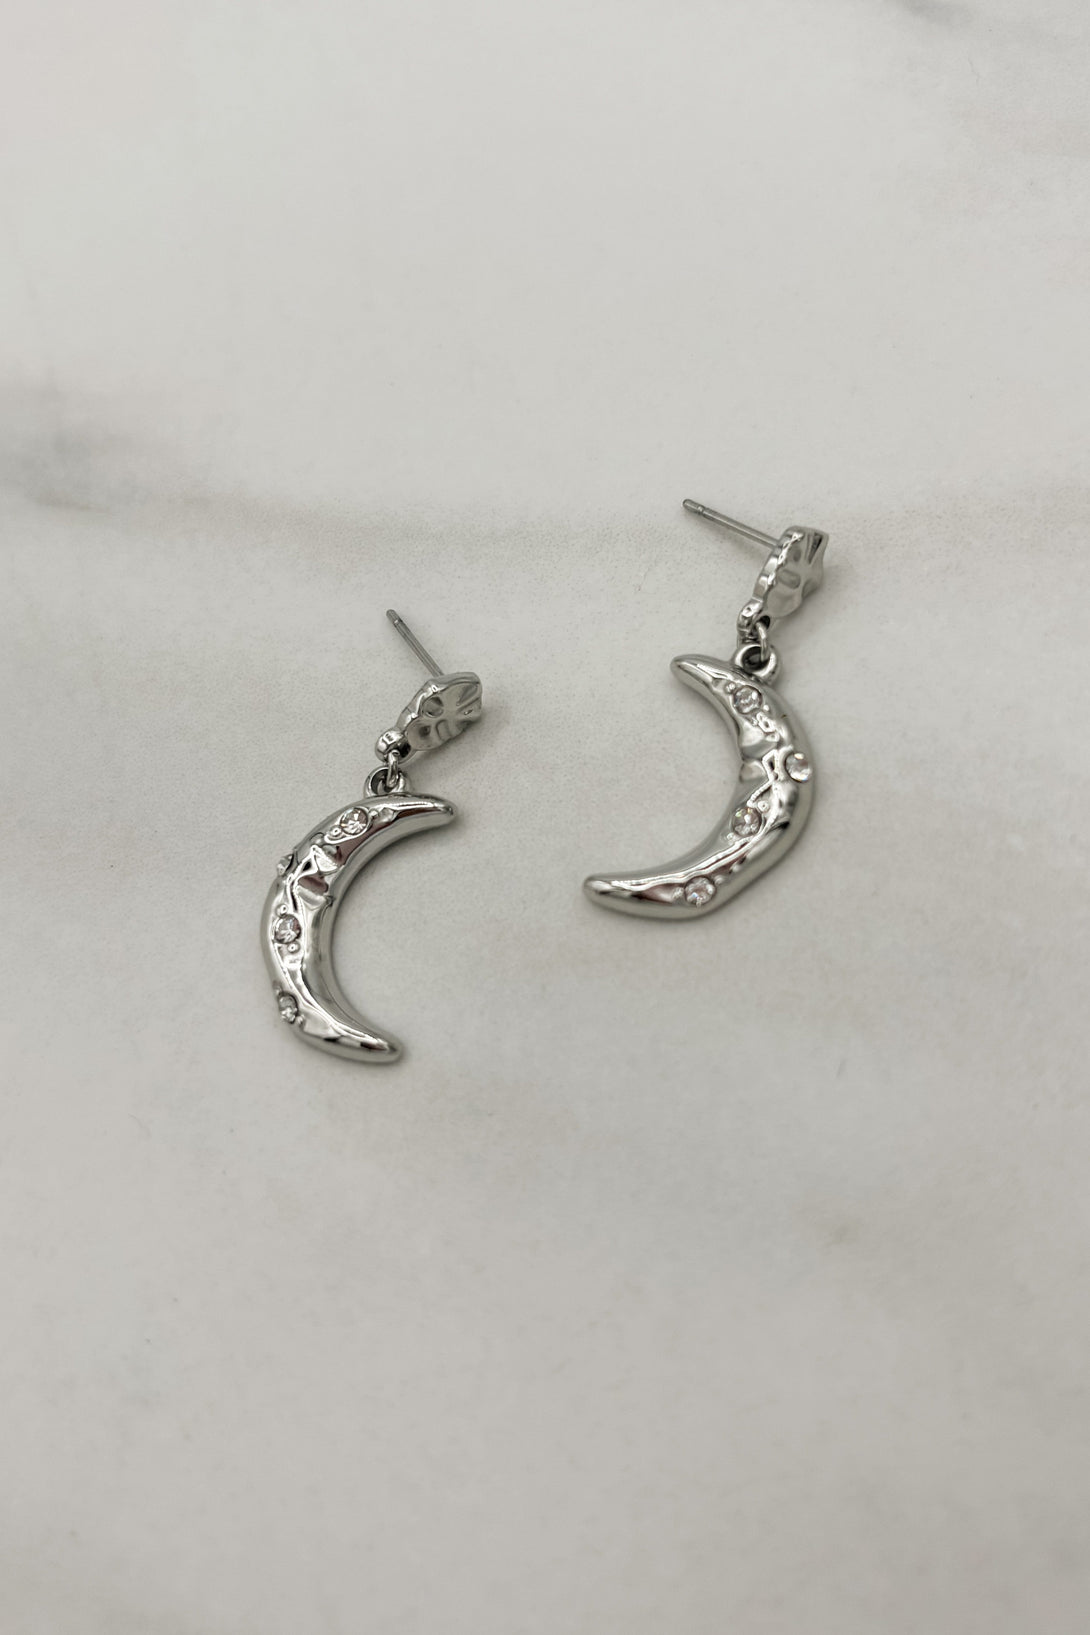 Hammered Crystal Encrusted Crescent Moon Earrings